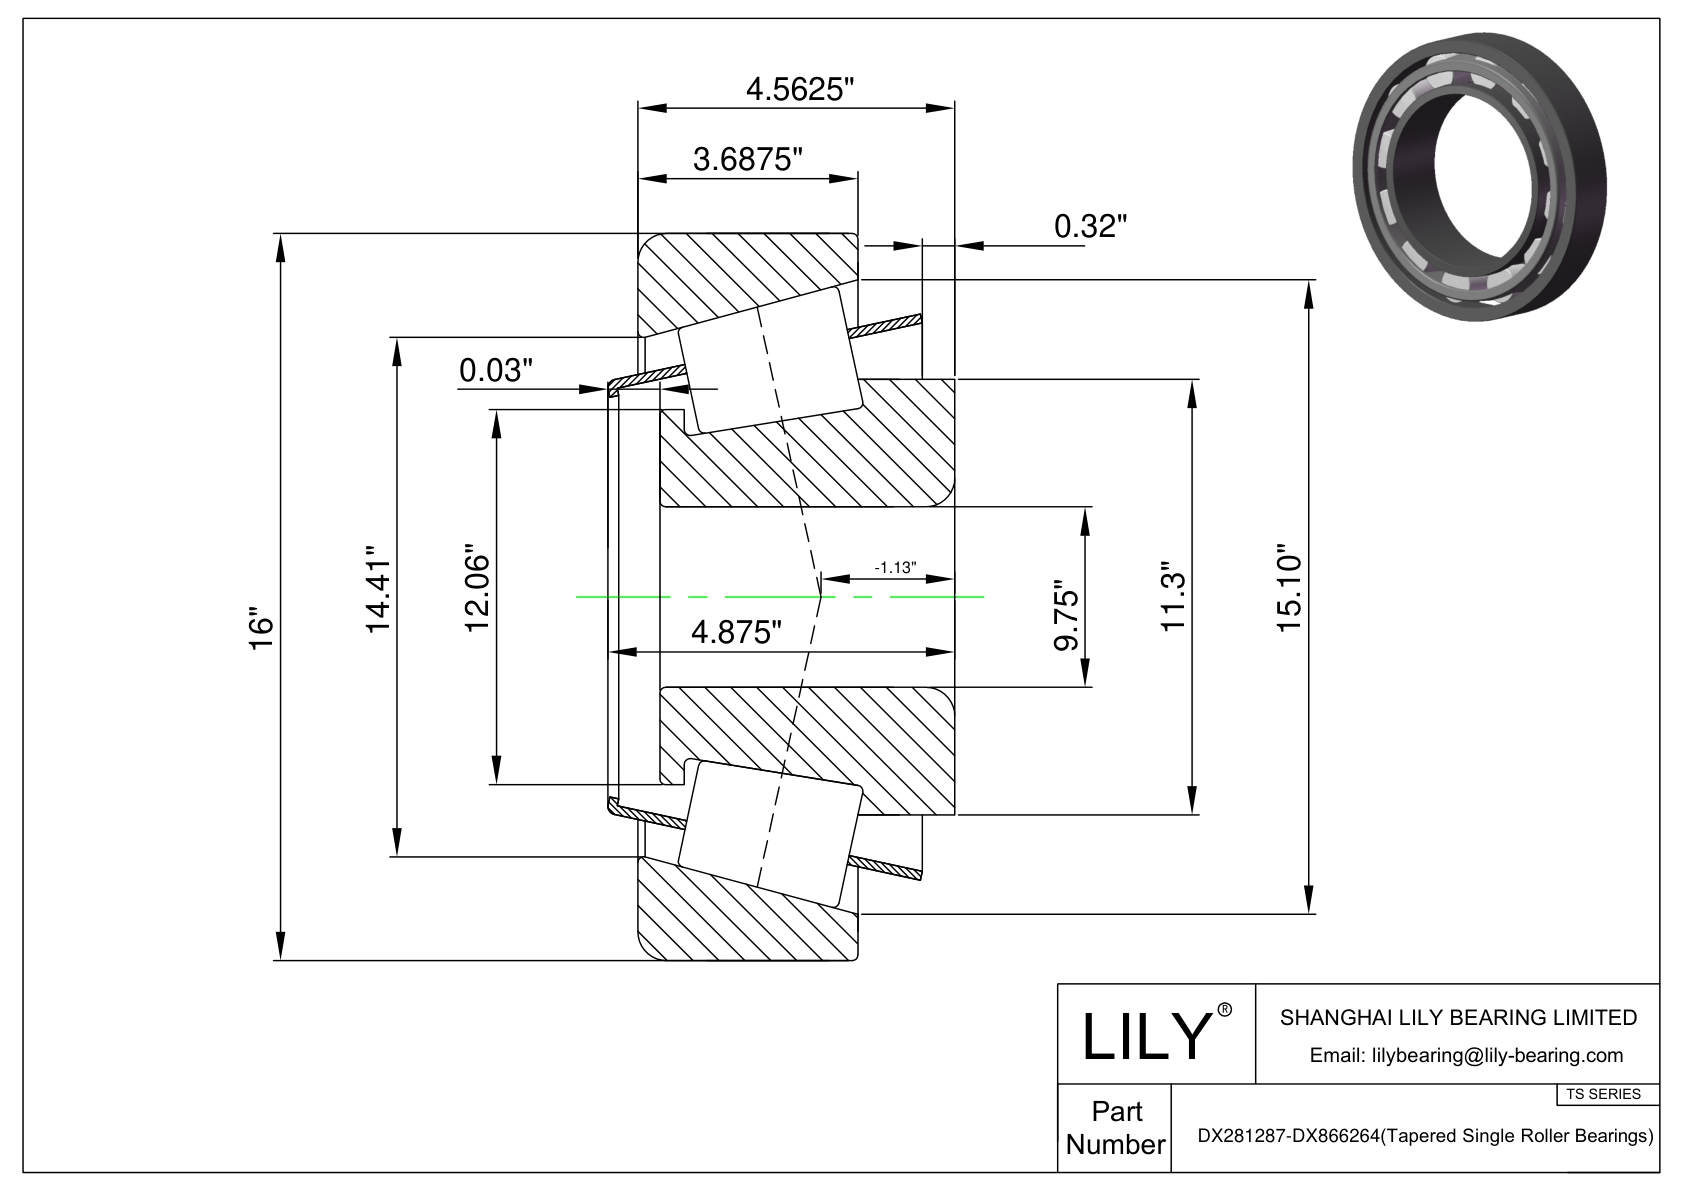 DX281287-DX866264 TS (Tapered Single Roller Bearings) (Imperial) cad drawing